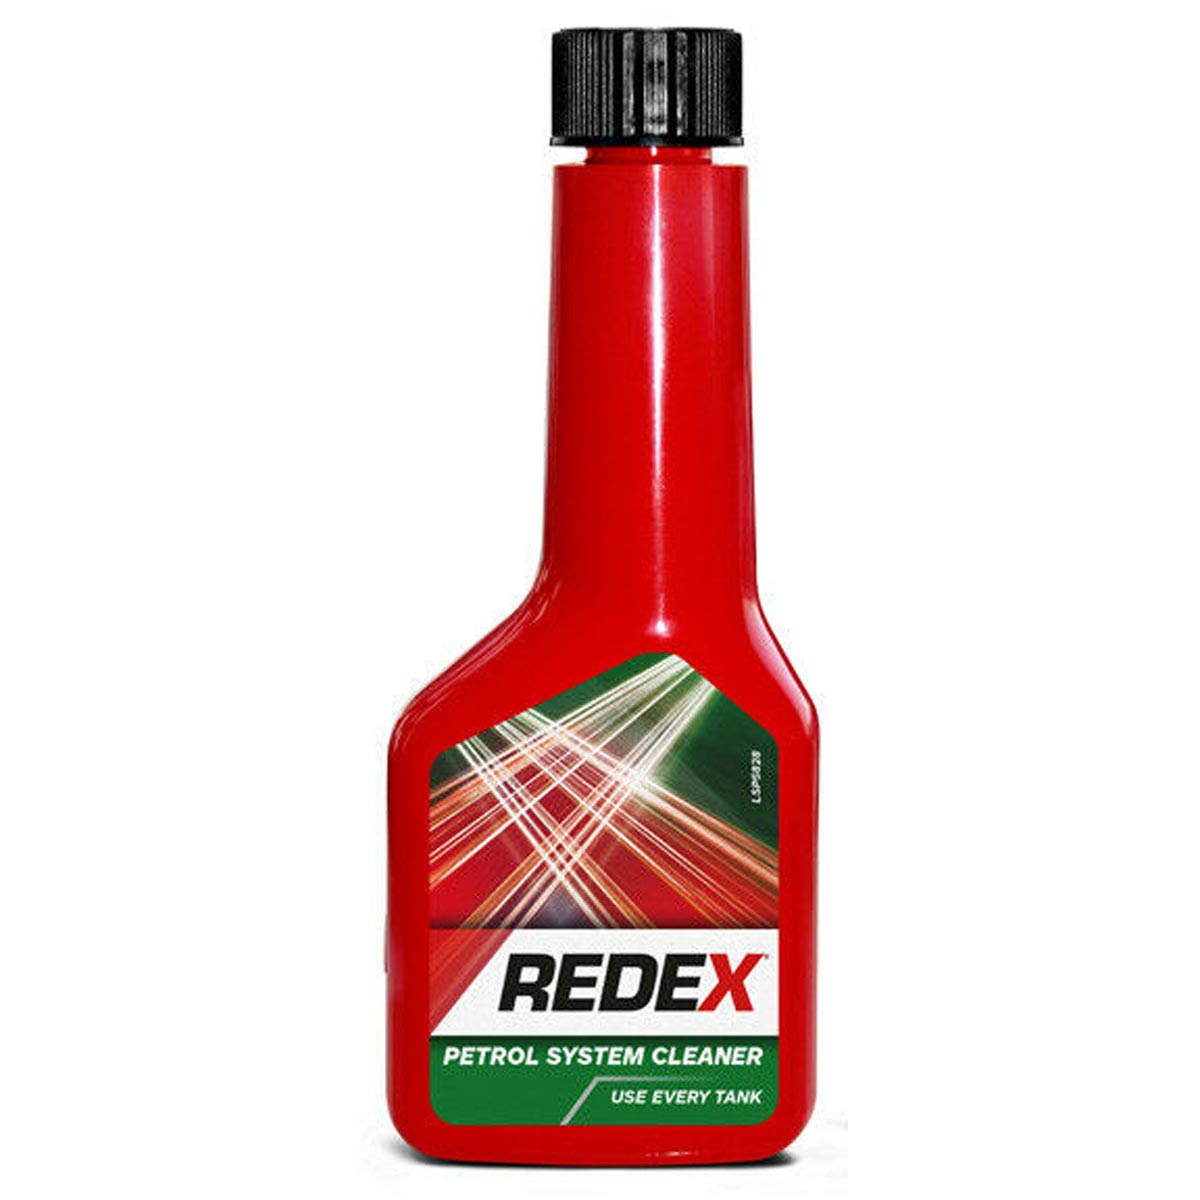 Redex Petrol System Cleaner - 90ml One-Shot Tank Additive